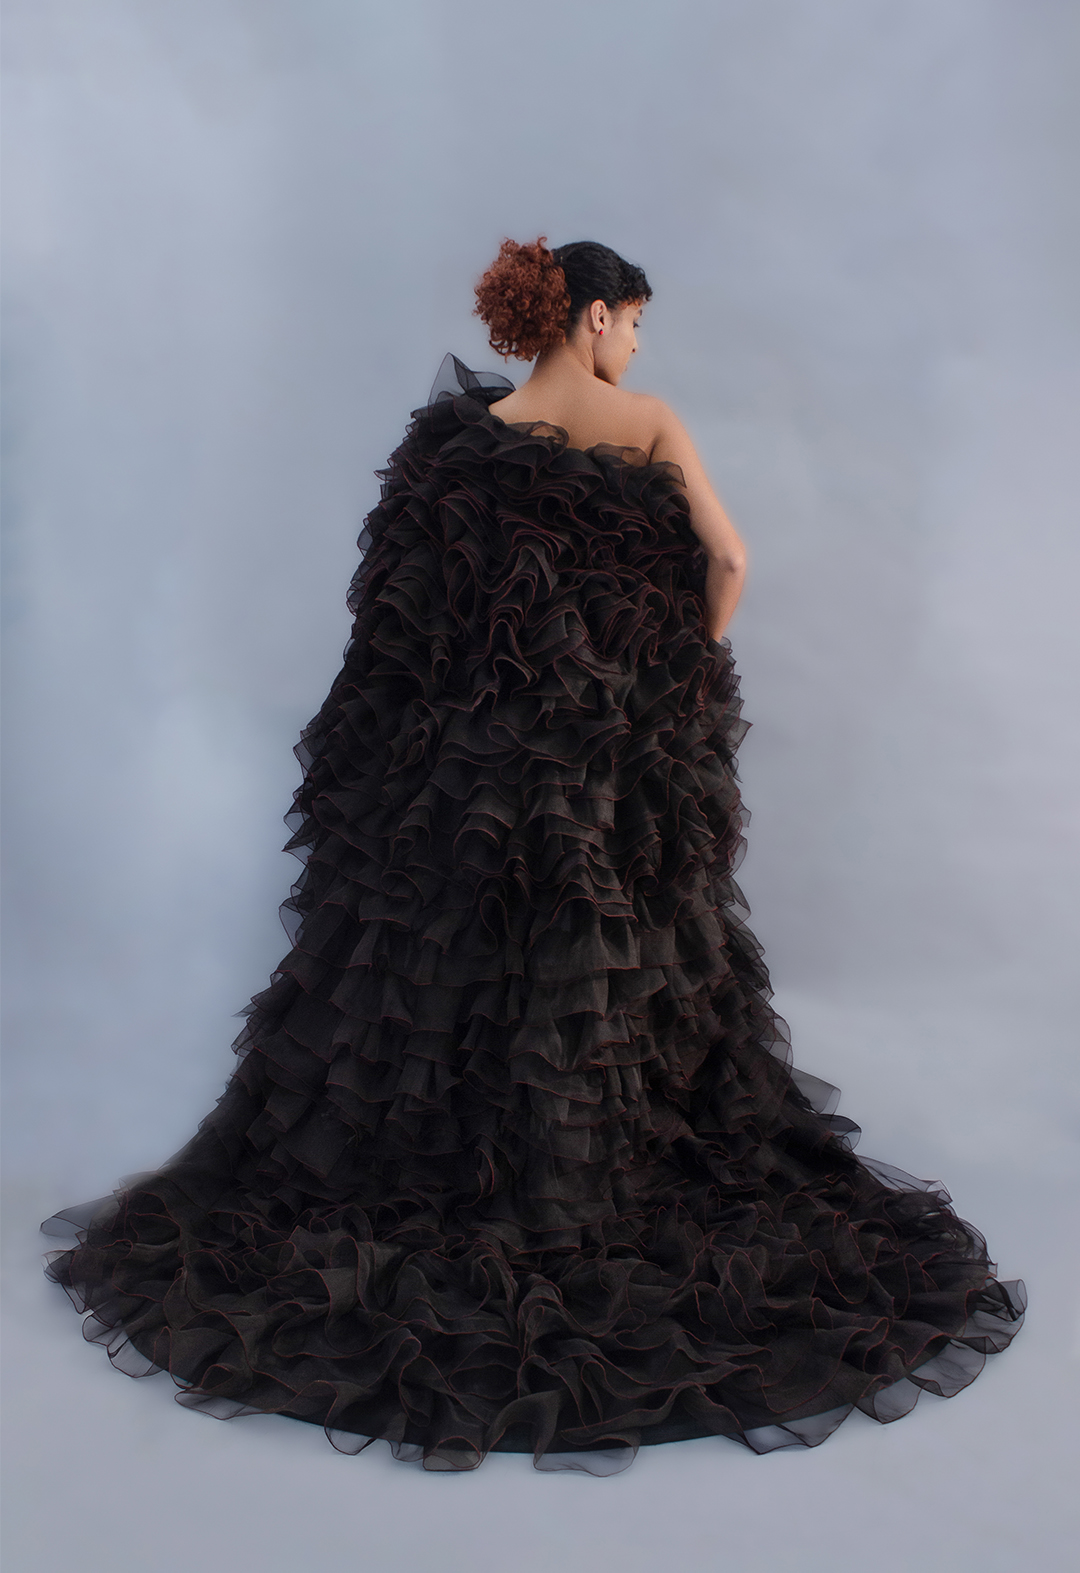 The back of the dress has a train with ruffles ranging in size from small to big. 